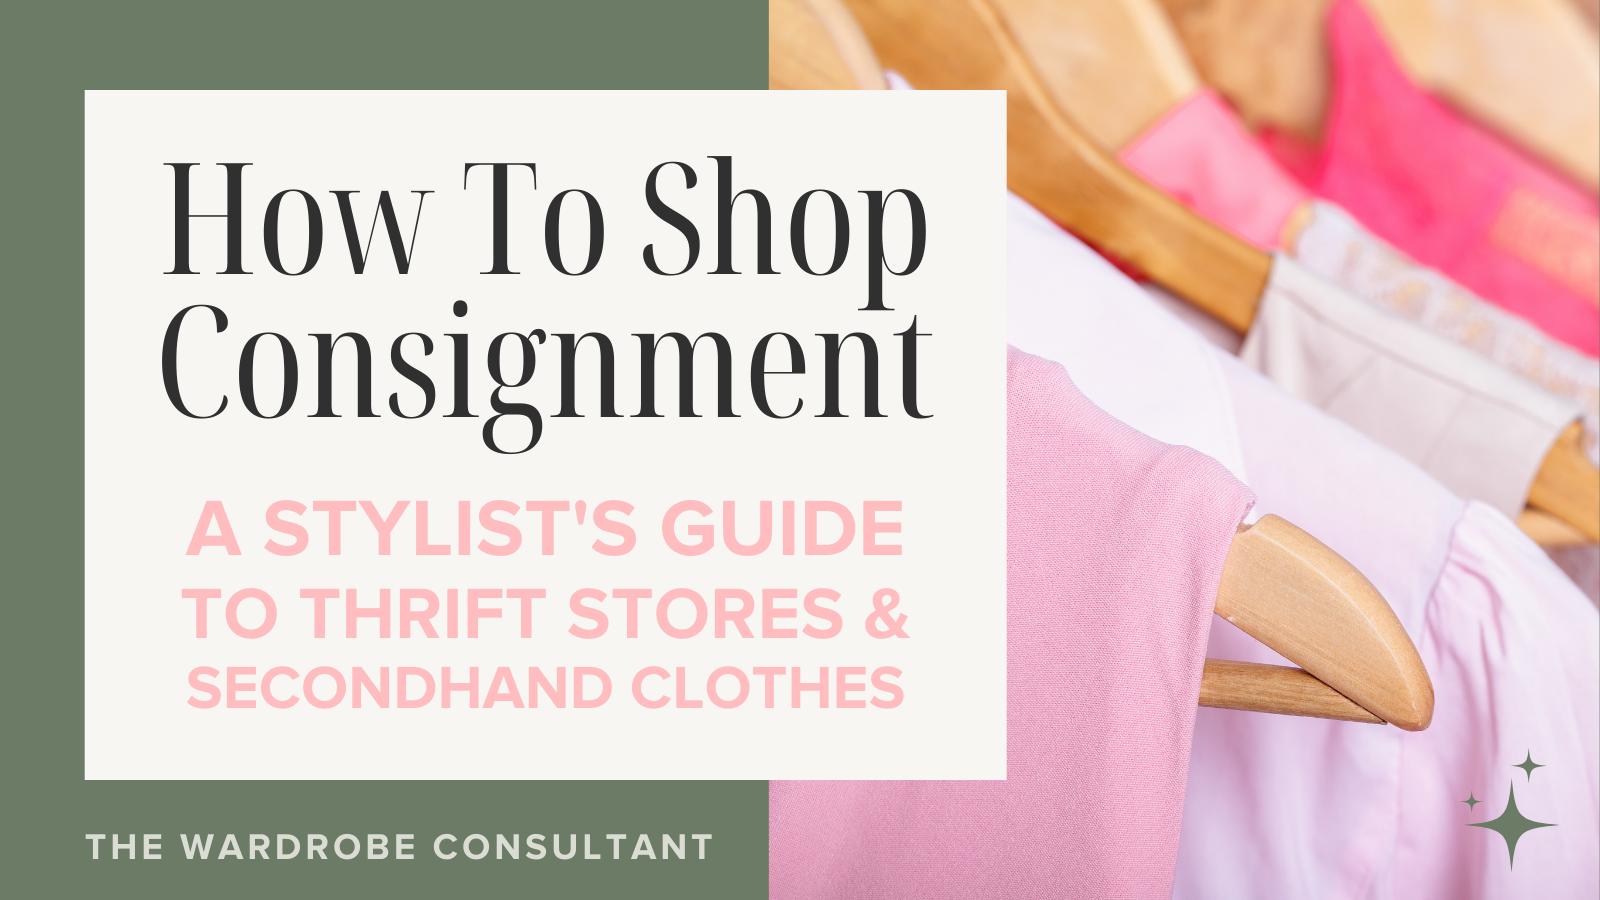 How To Shop Consignment: Stylist's Guide to Thrift Stores and